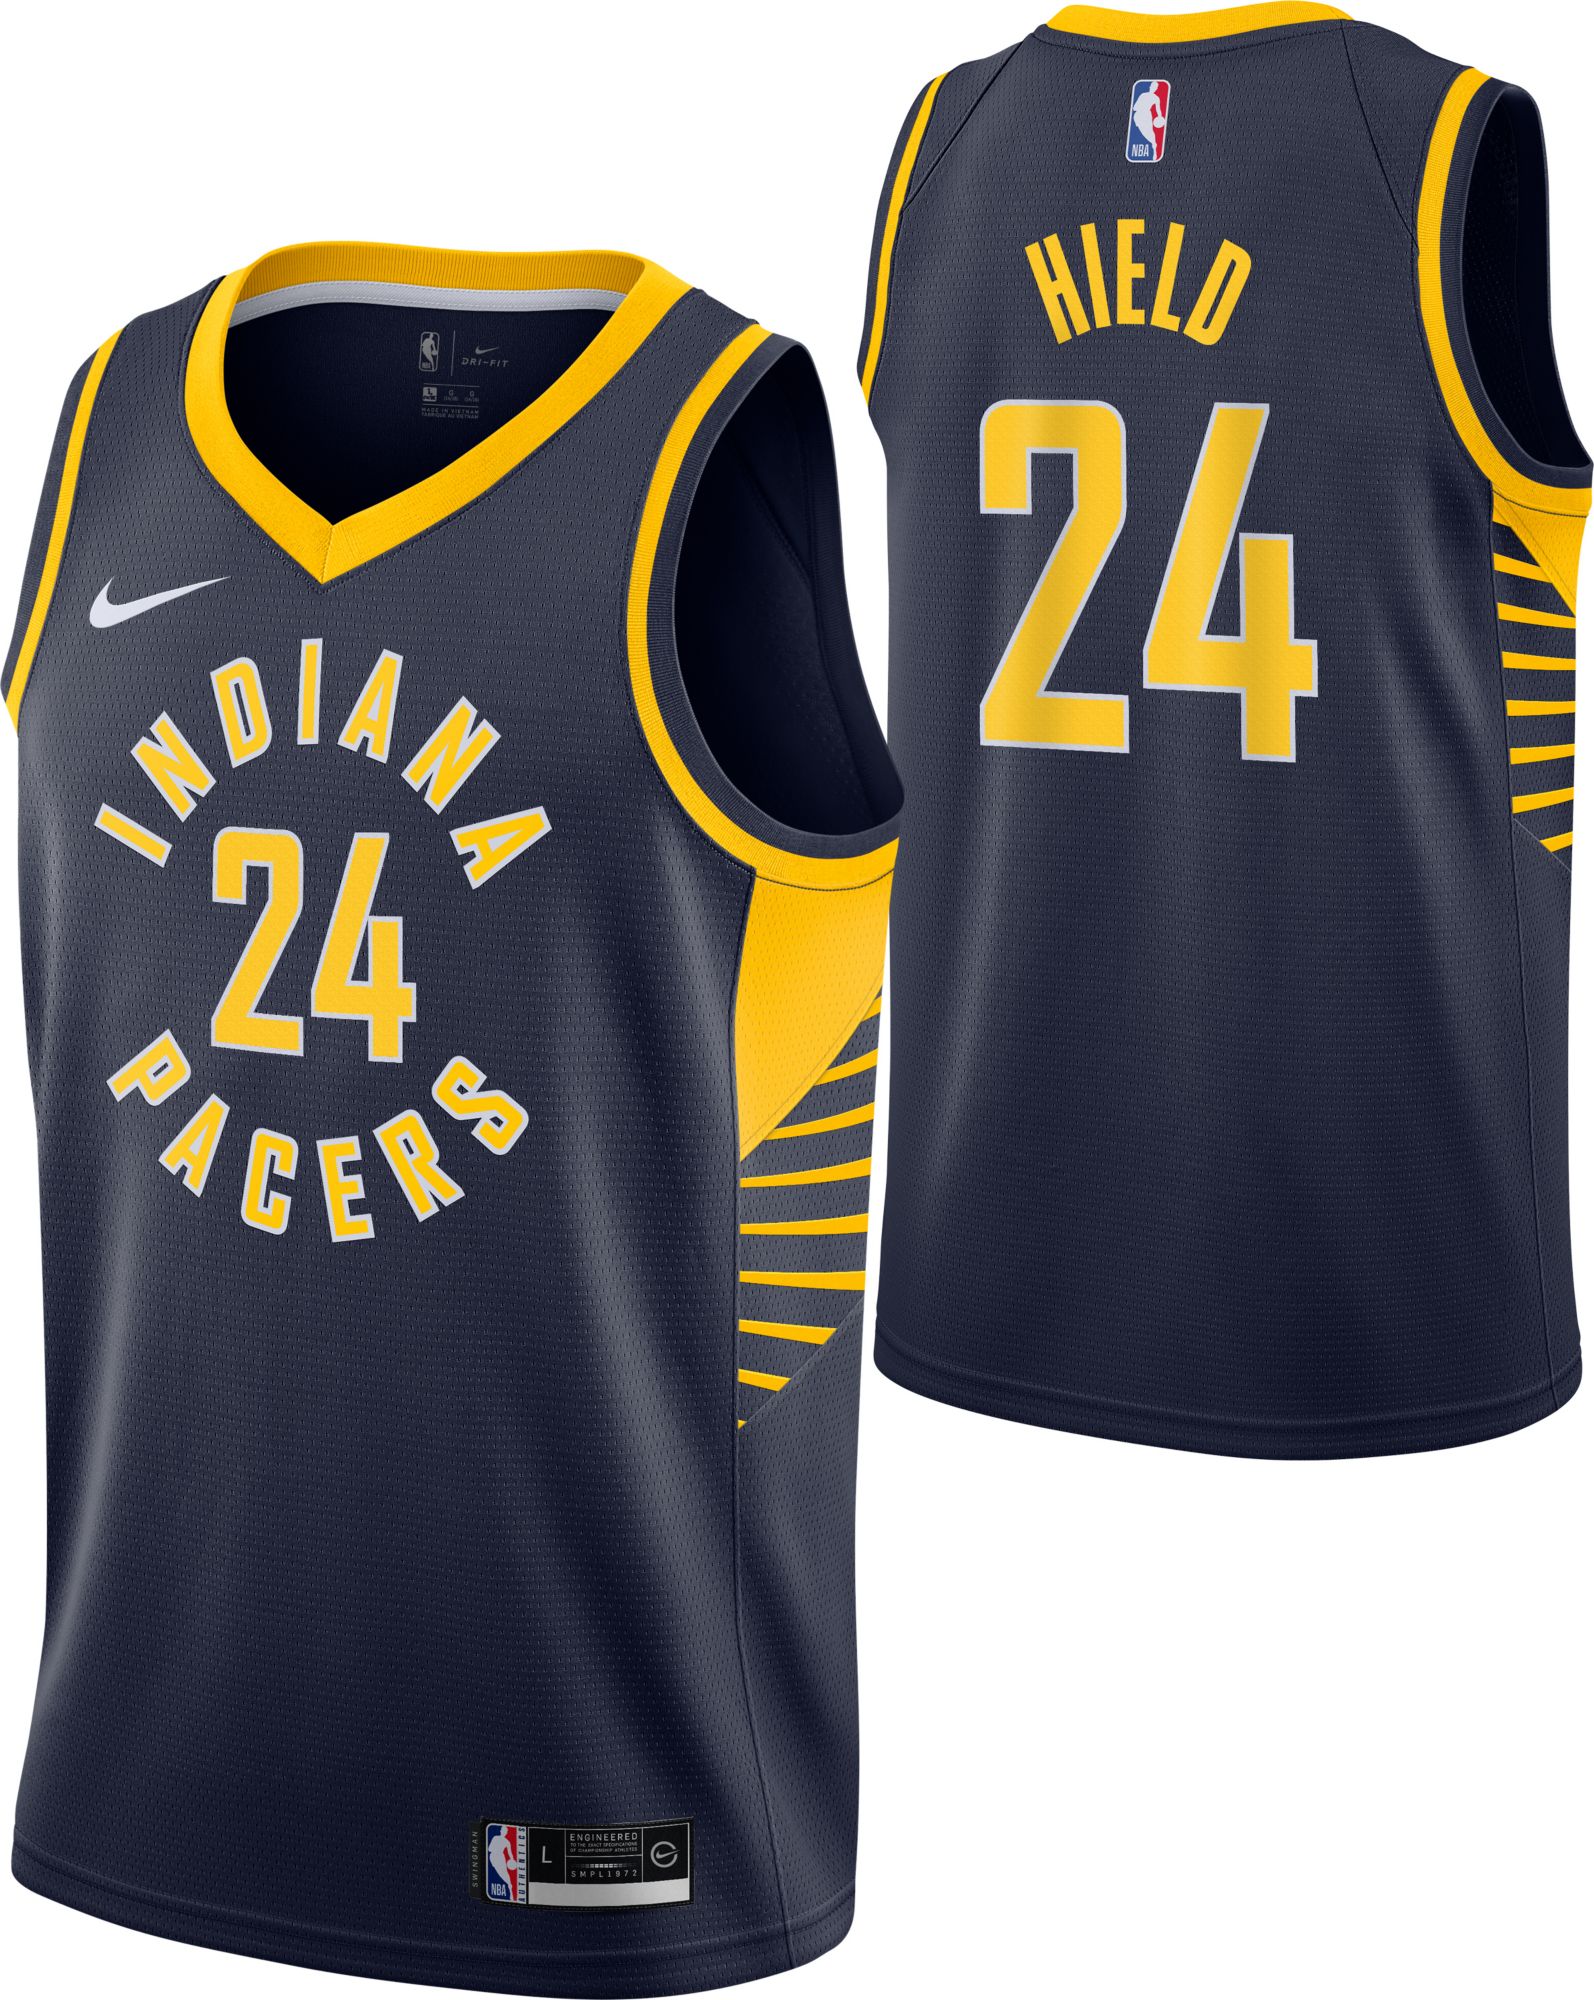 indiana pacers jersey youth